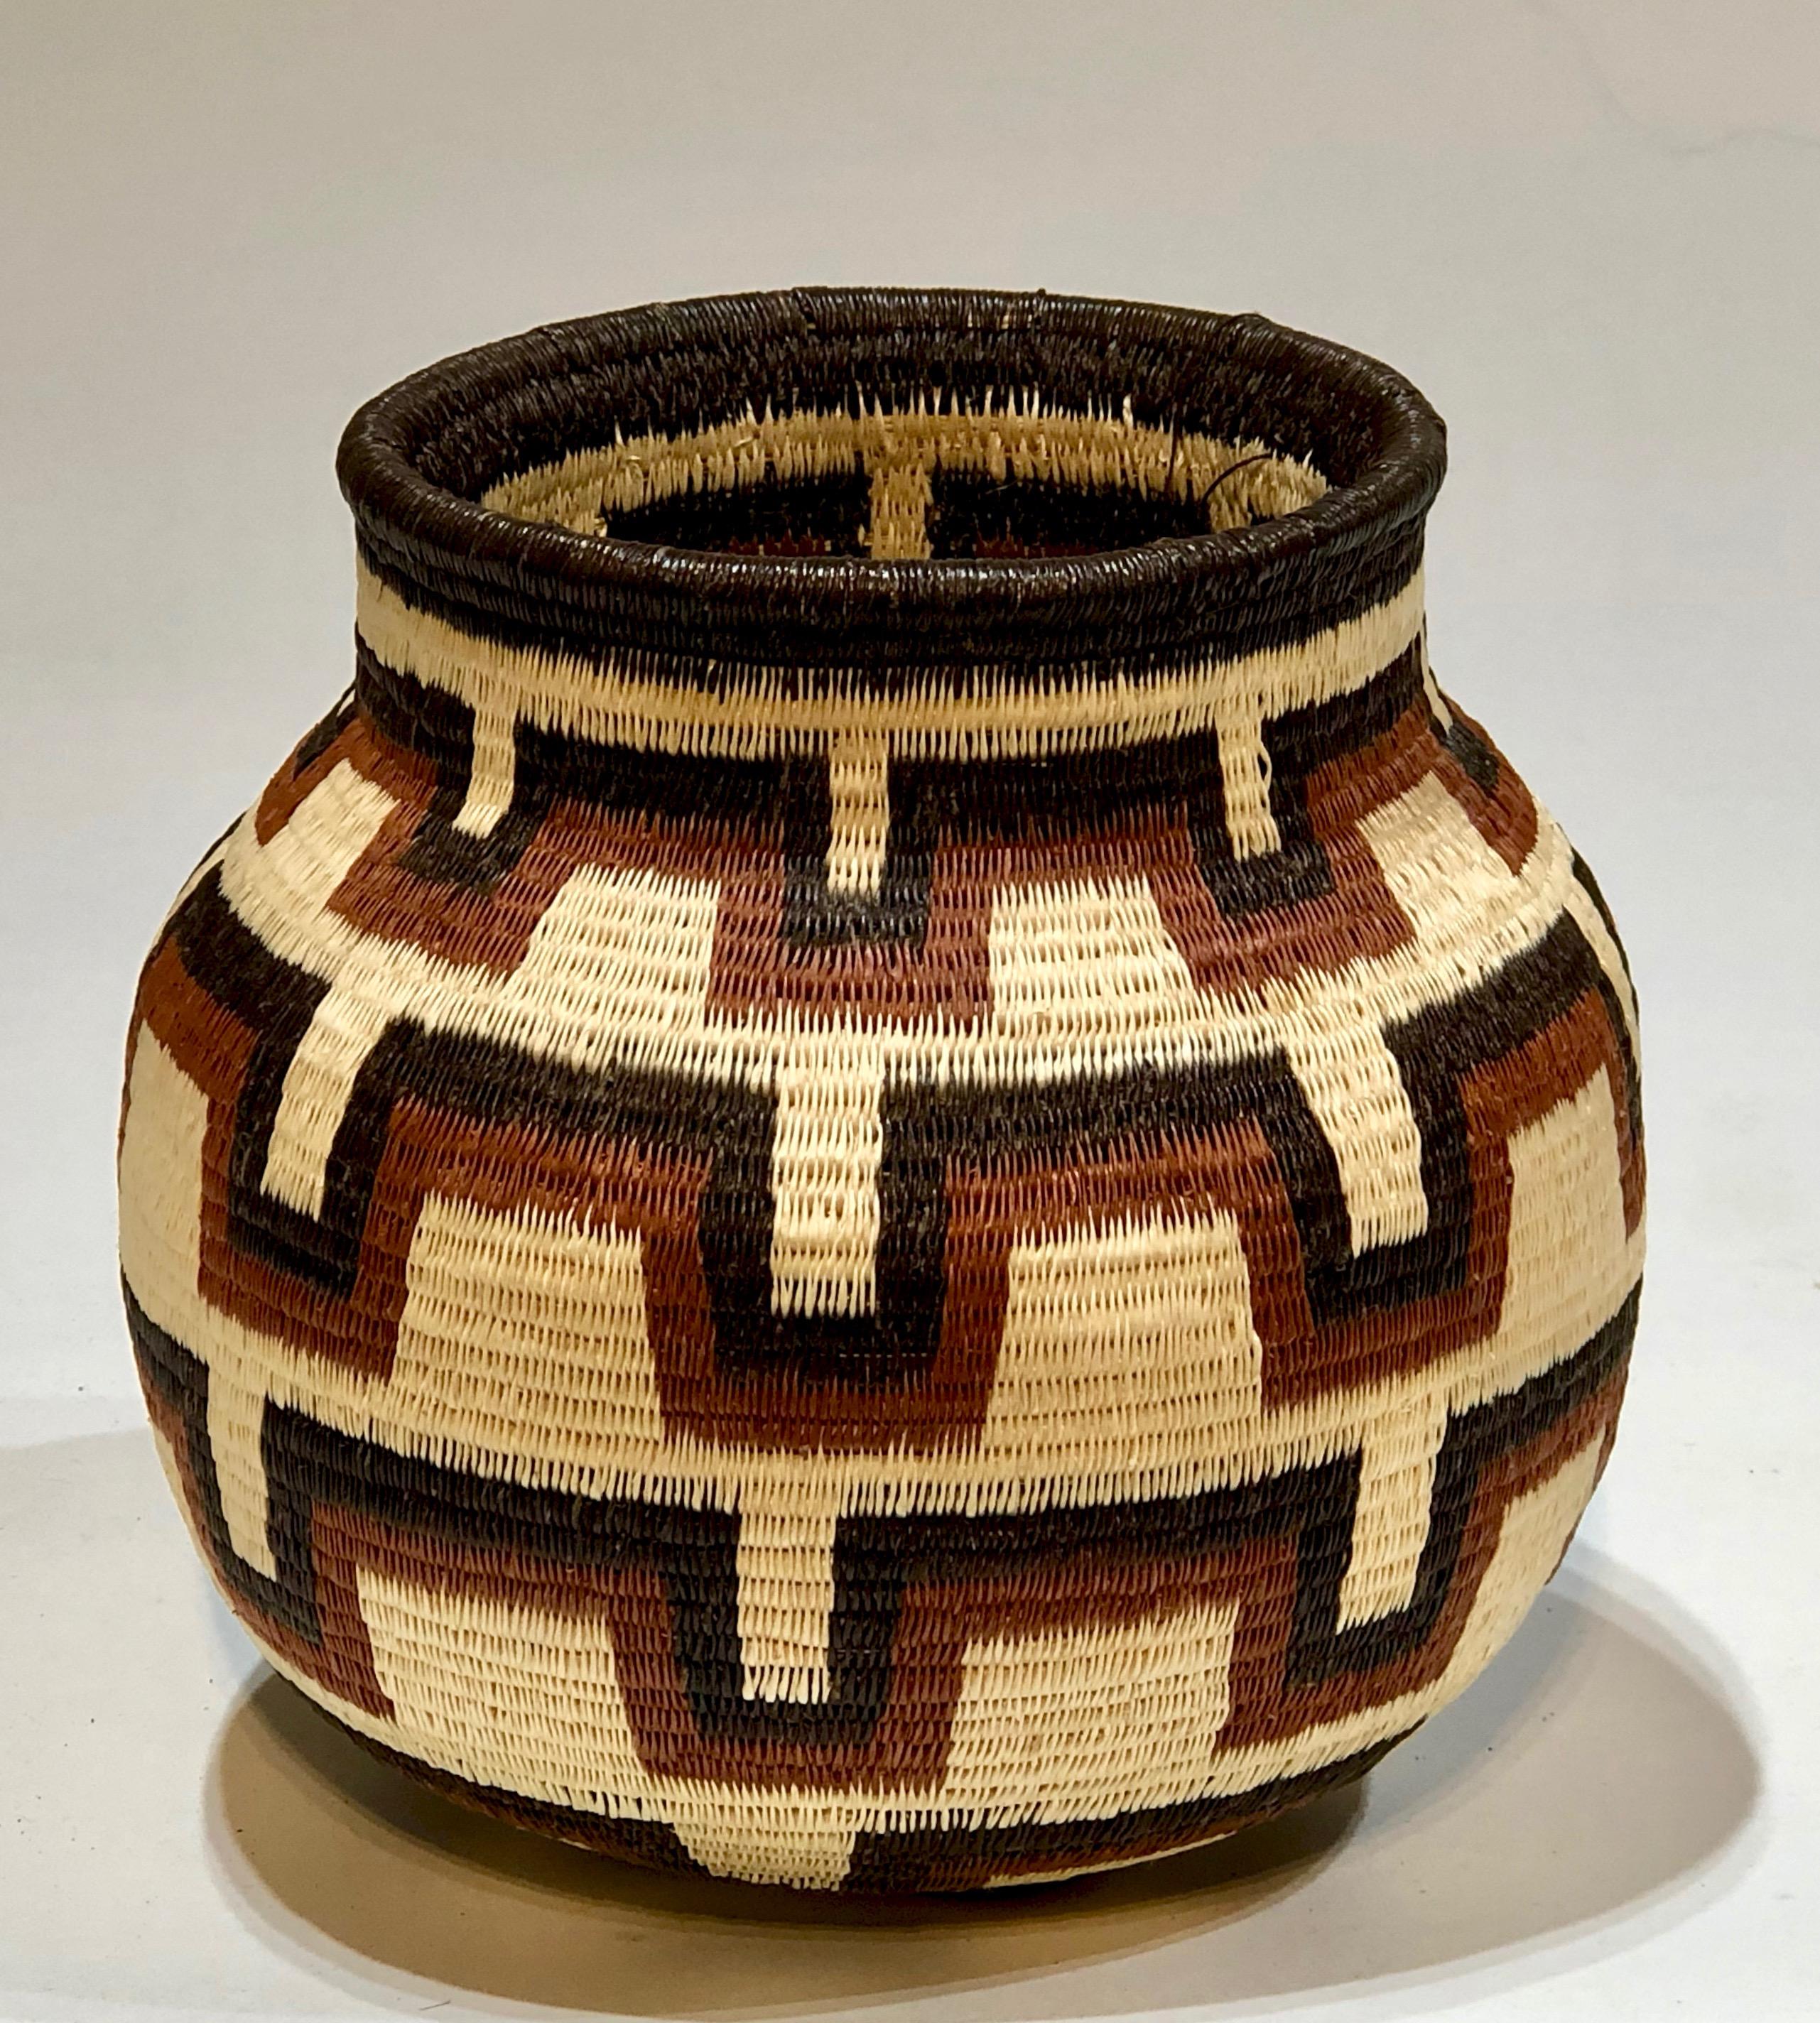 Wounaan Tribe Panama Rainforest Basket, brown, white and black geometric design - Art by Unknown